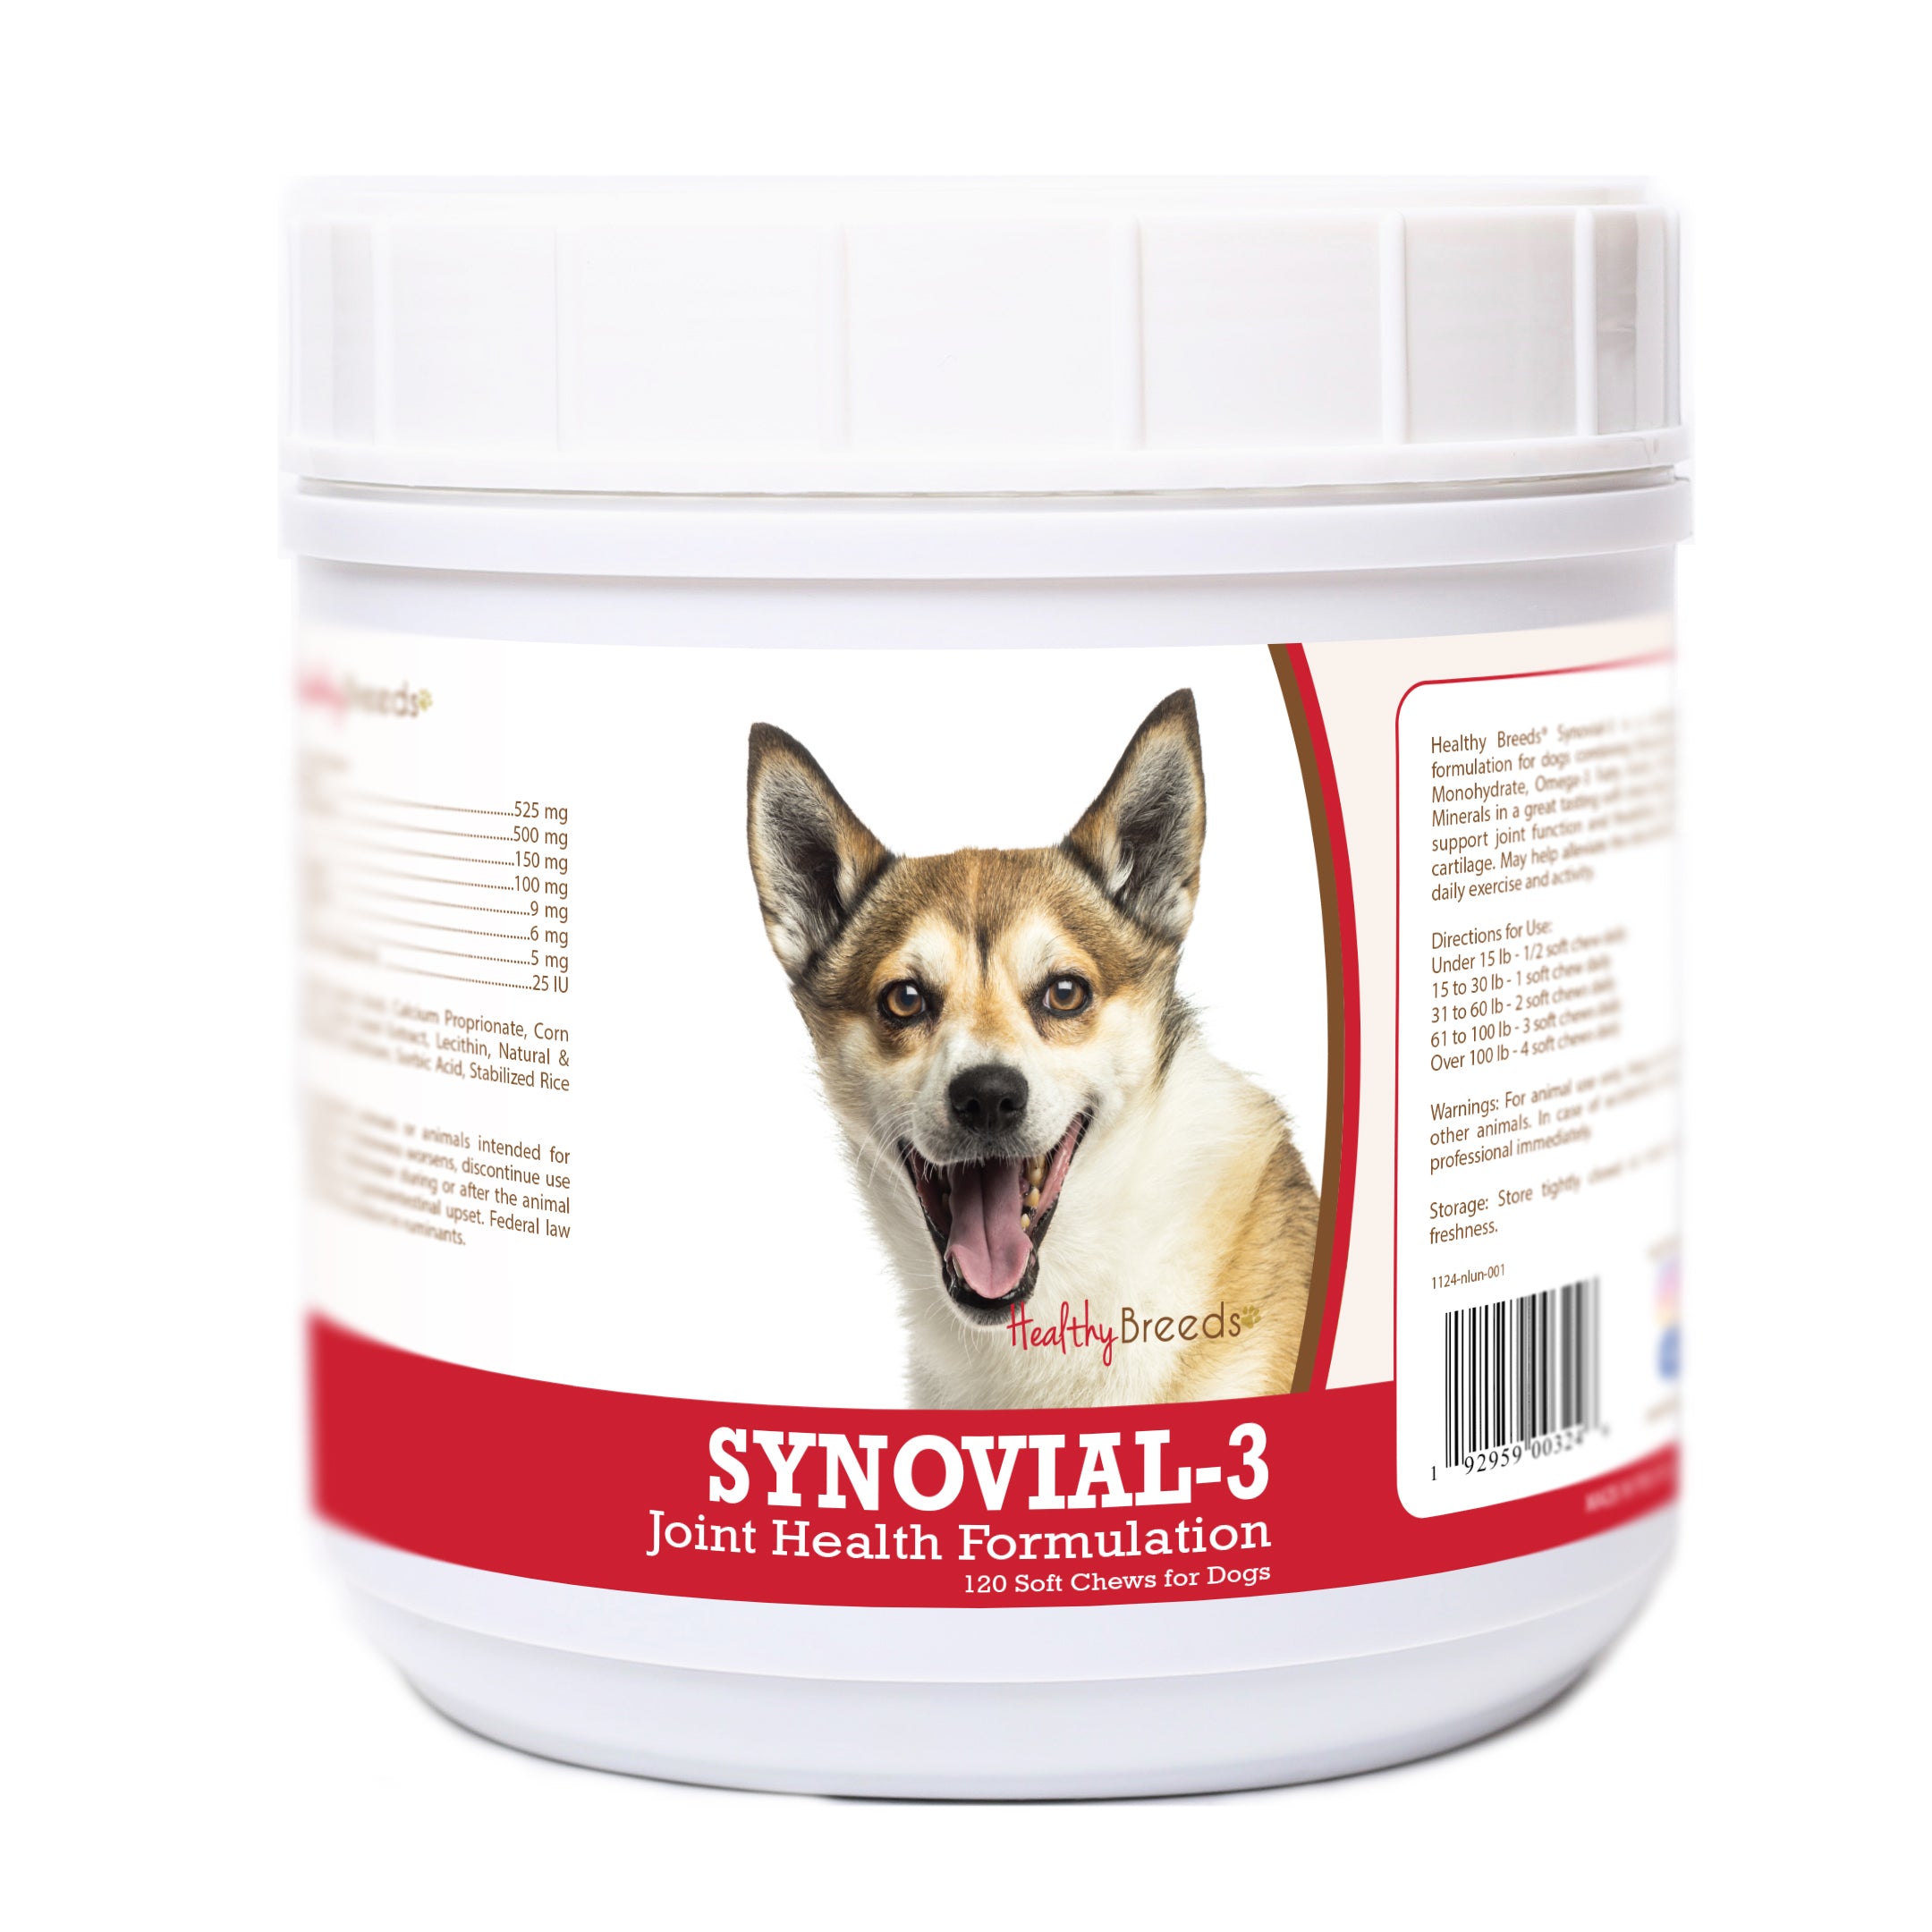 Norwegian Lundehund Synovial-3 Joint Health Formulation Soft Chews 120 Count